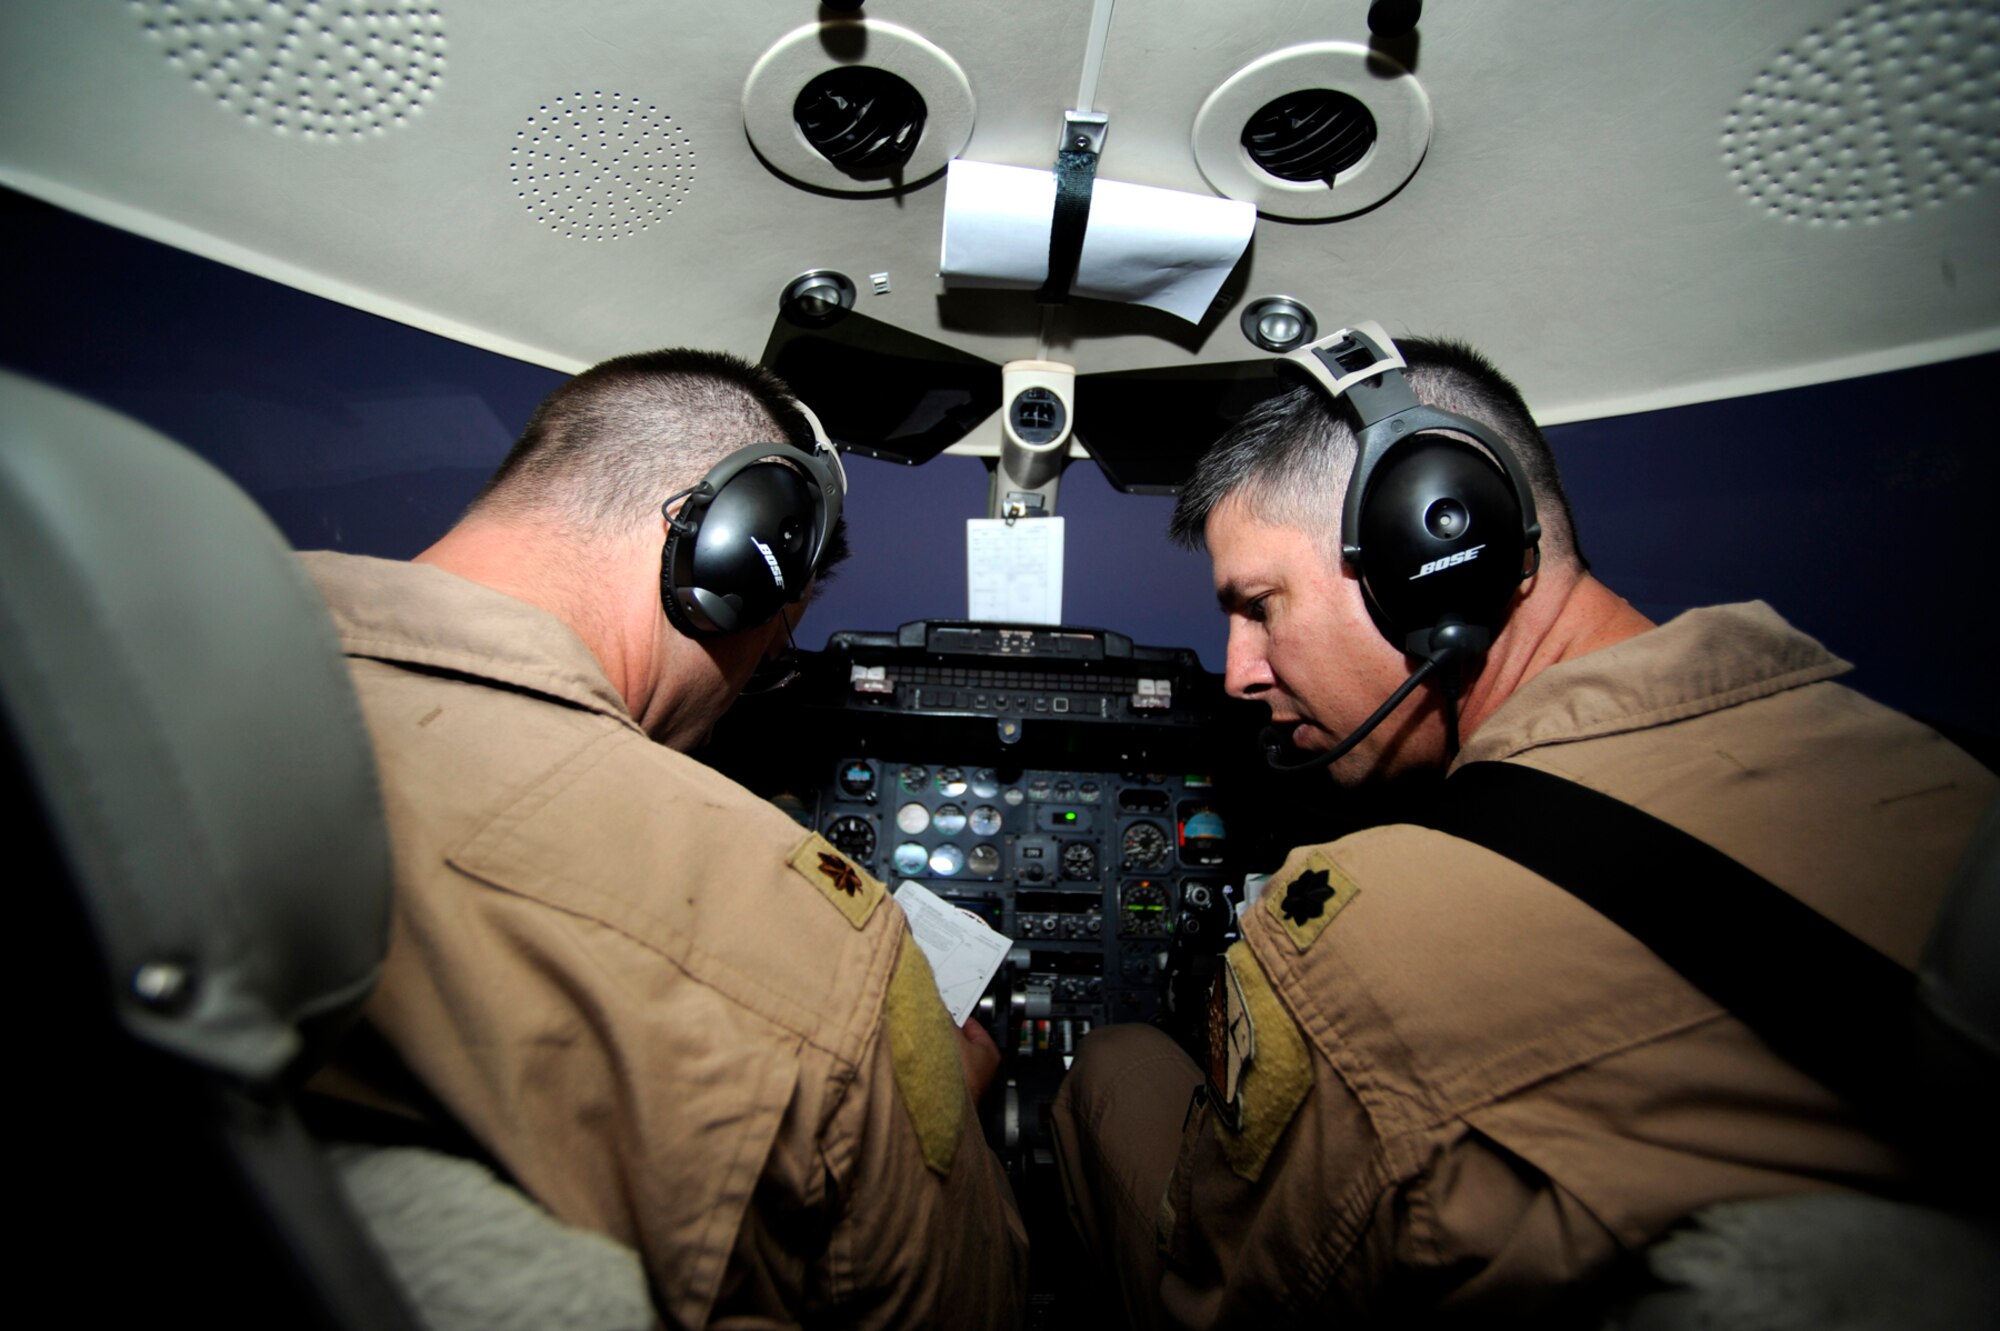 Left, Maj. Craig Borgstrom and Lt. Col. Rick Omang, 379th Expeditionary Operations Group C-21 pilots, monitor flight controls during combat operations over Southwest Asia, July 26. The C-21 is a twin turbofan engine aircraft used for cargo and passenger airlift. Major Borgstrom and Colonel Omang are deployed from the 177th Airlift Squadron, North Dakota Air National Guard. (U.S. Air Force photo by Staff Sgt. Shawn Weismiller)